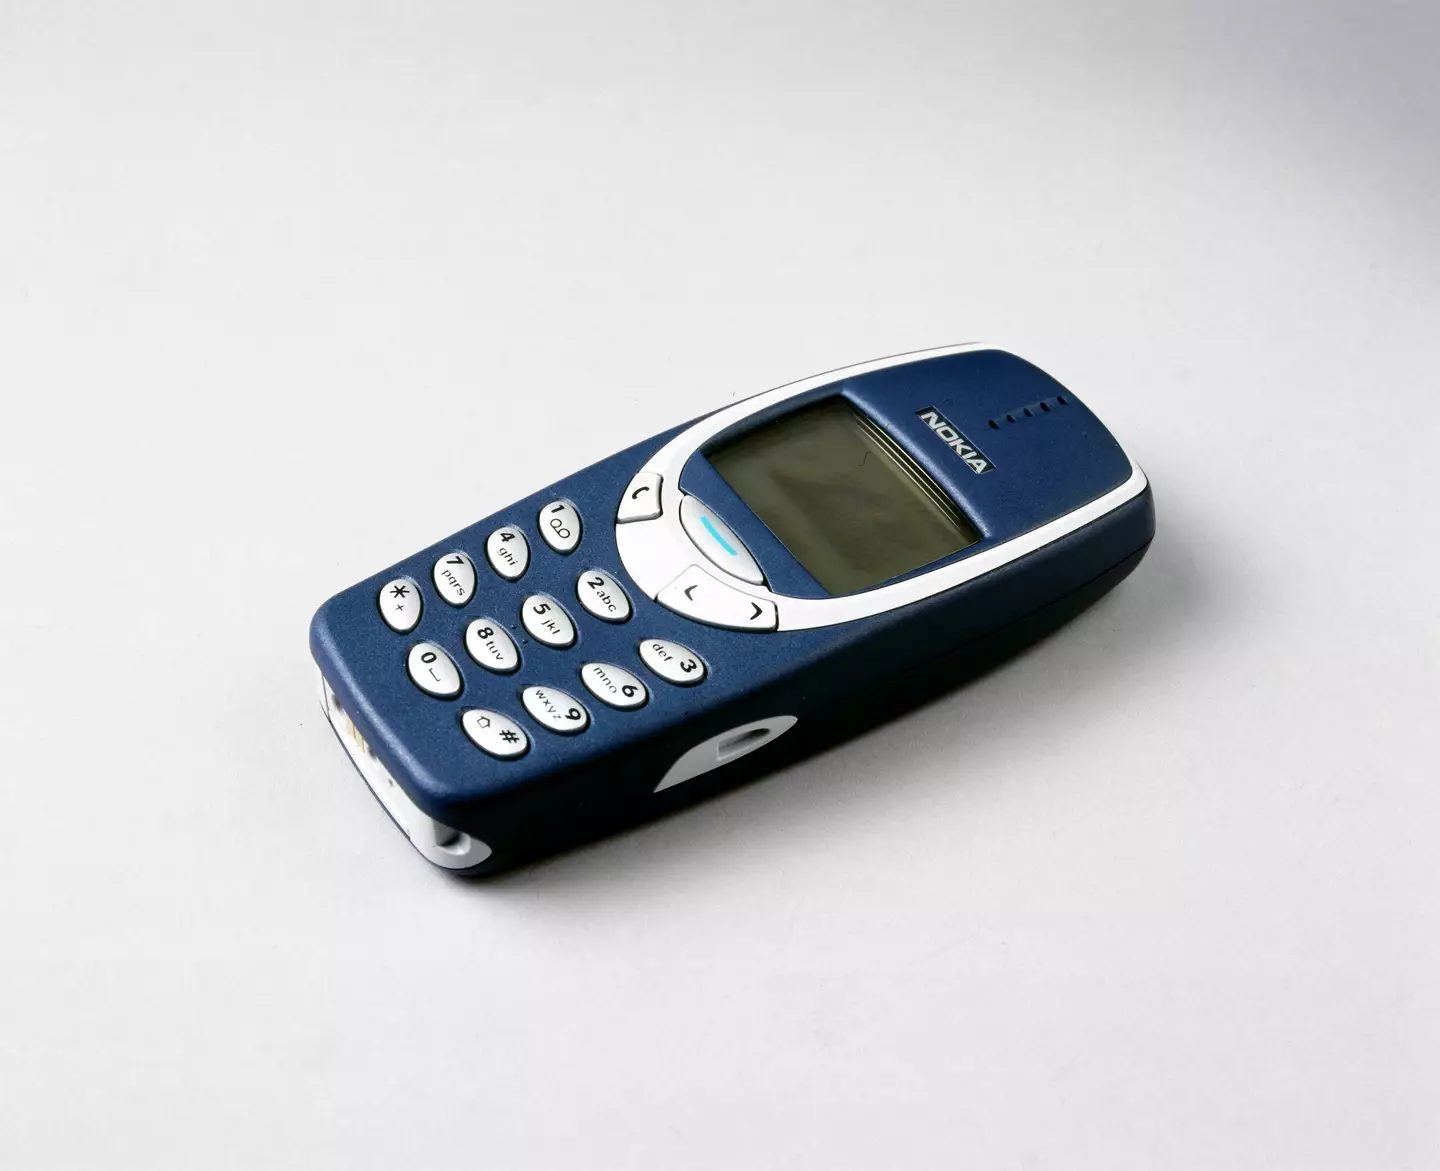 The Nokia 3310 released in 2000.